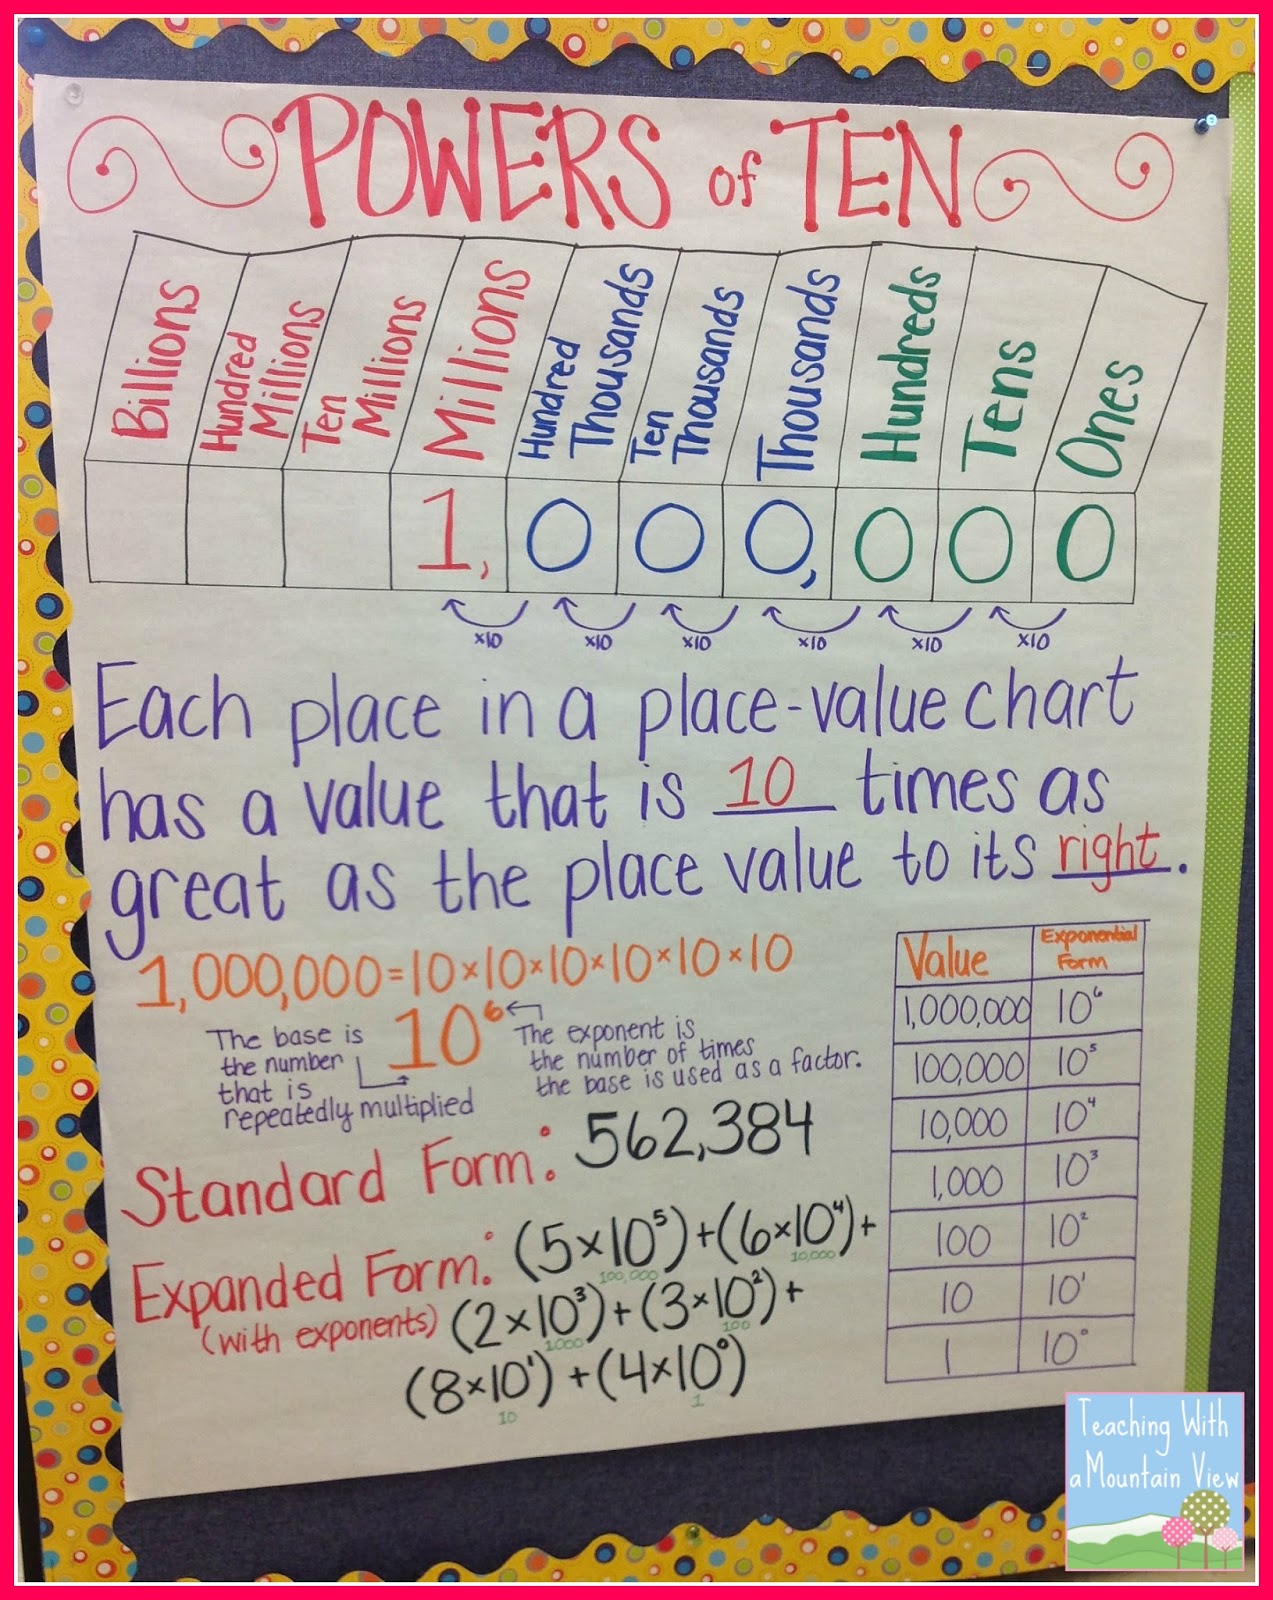 Teaching With a Mountain View: Teaching Exponents